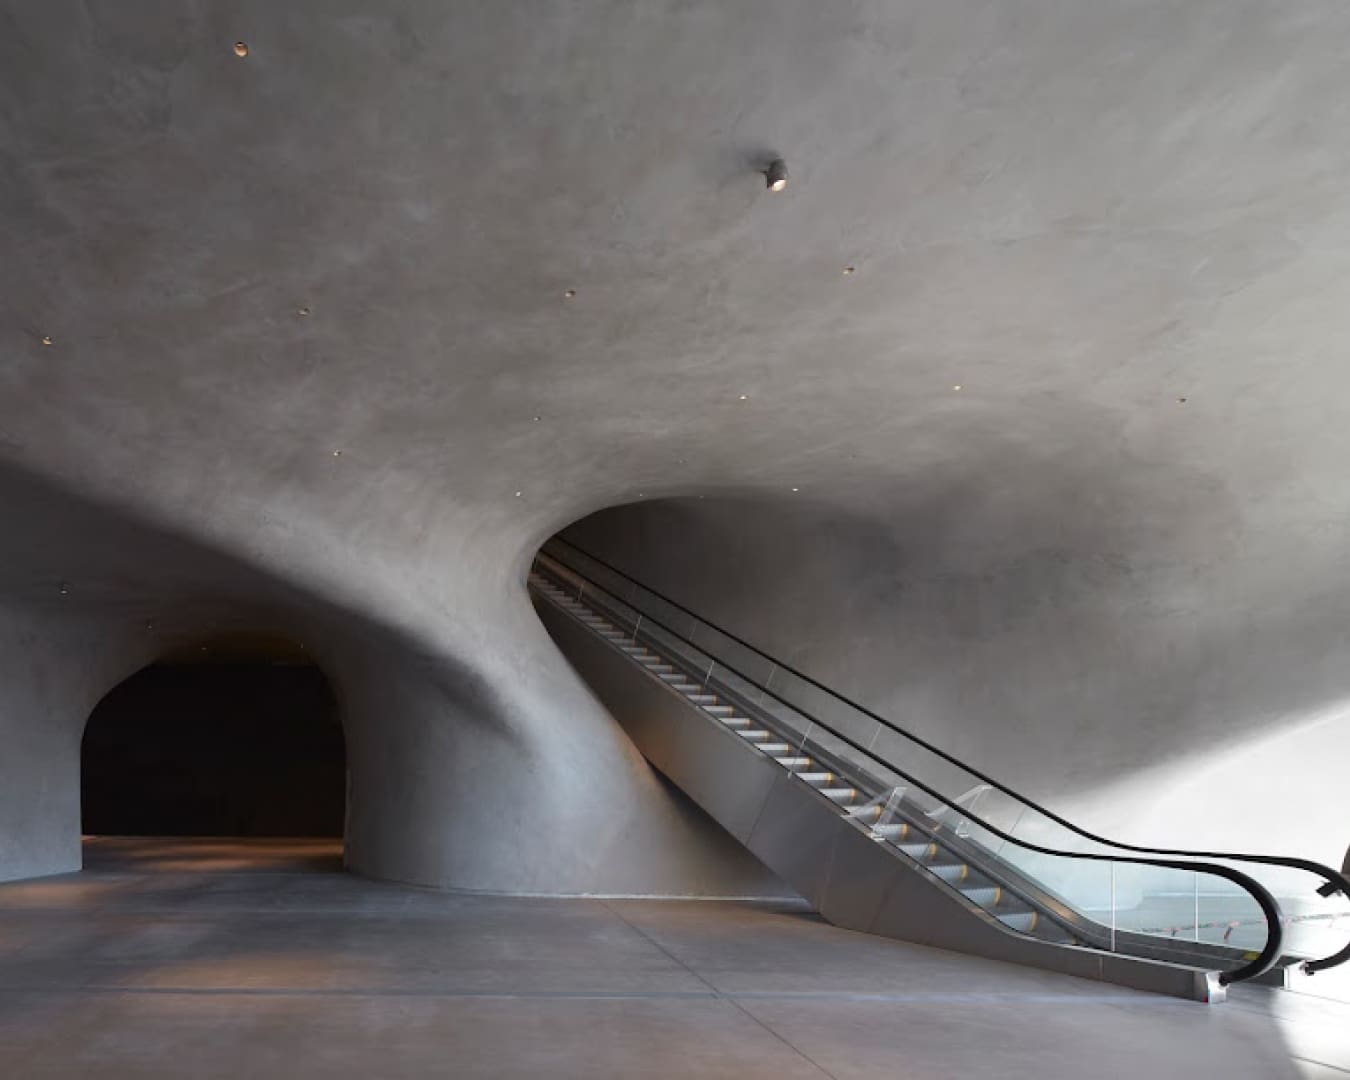 The imposing interiors of The Broad, with a curved concrete structure and an escalator in view